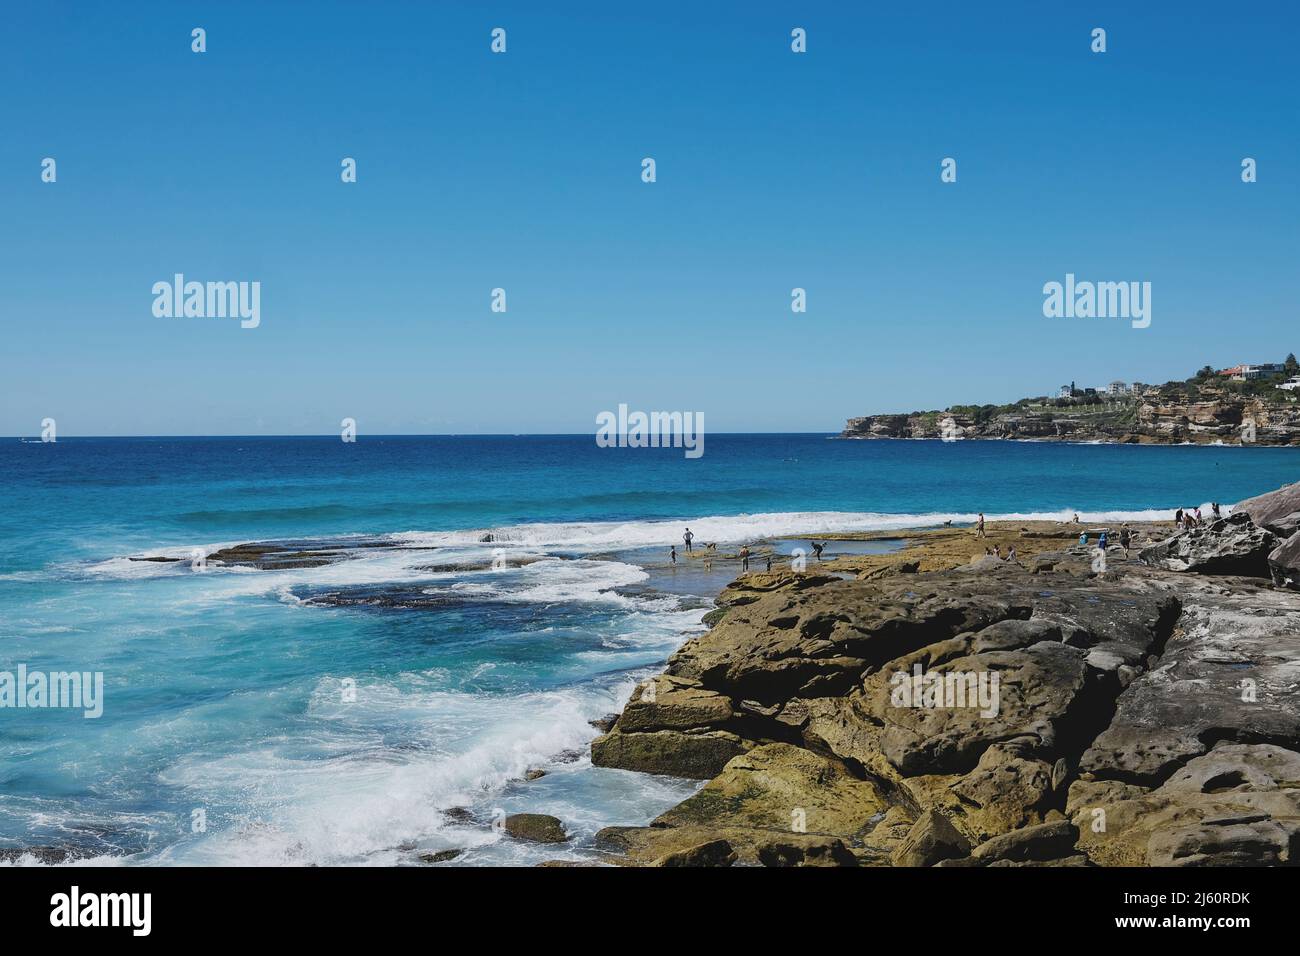 Surfers riding the waves at Tamarama Beach, on the eastern coast of Sydney, New South Wales, Australia Stock Photo